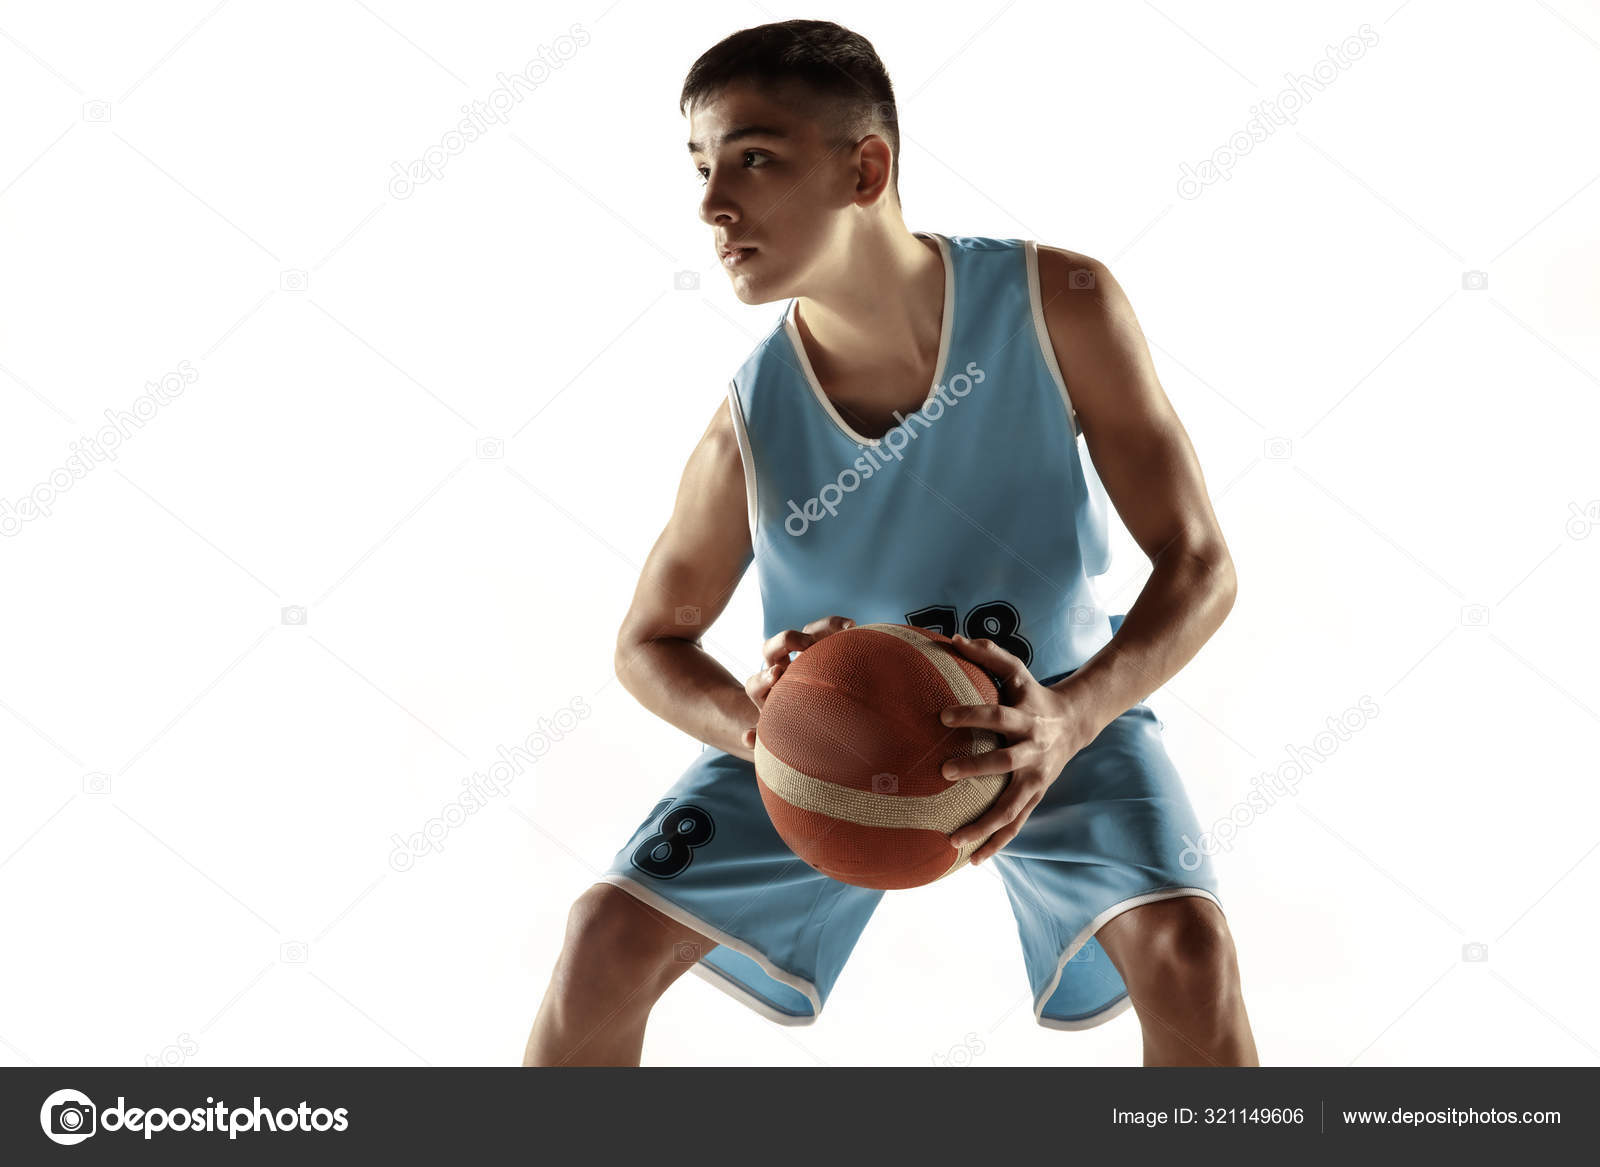 Basketball player in action isolated on white background Stock